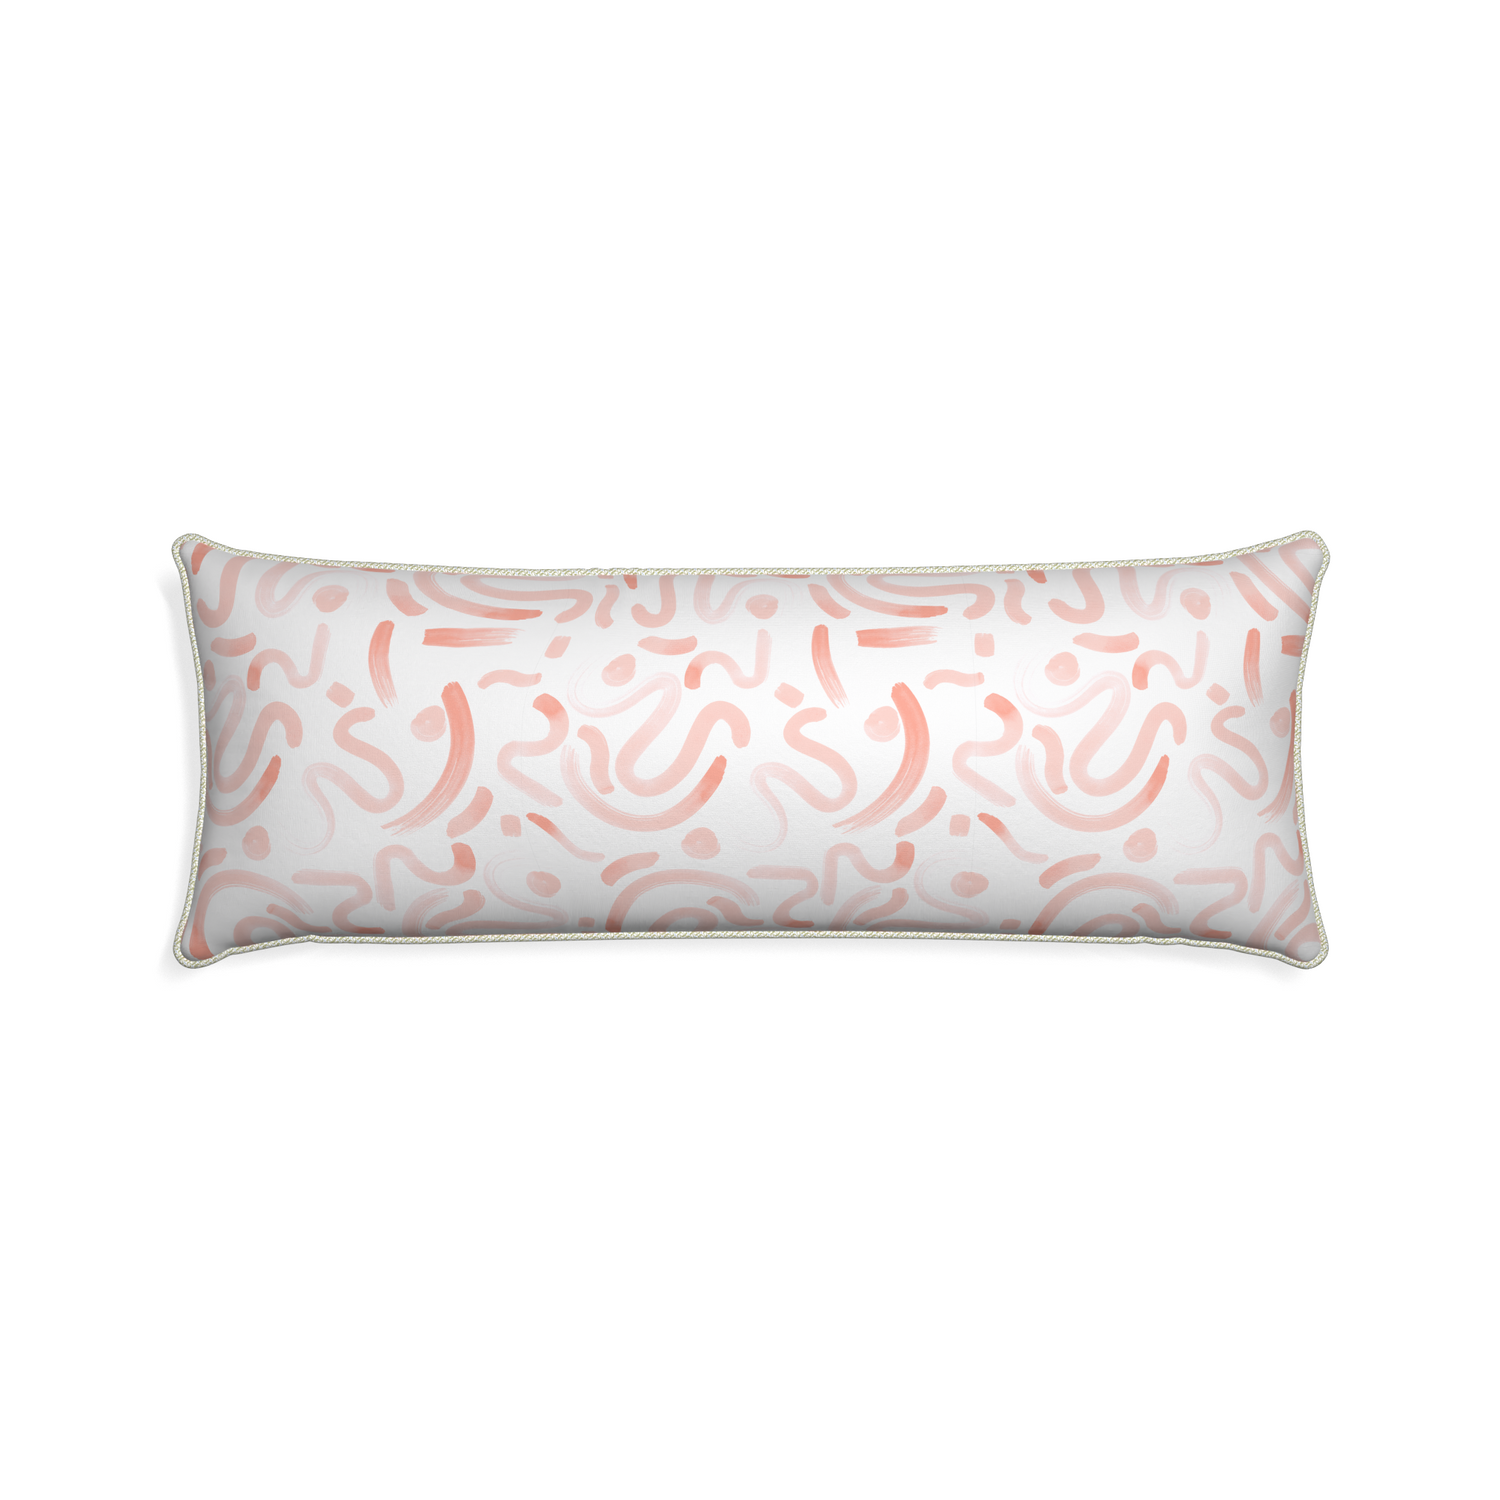 Xl-lumbar hockney pink custom pink graphicpillow with l piping on white background